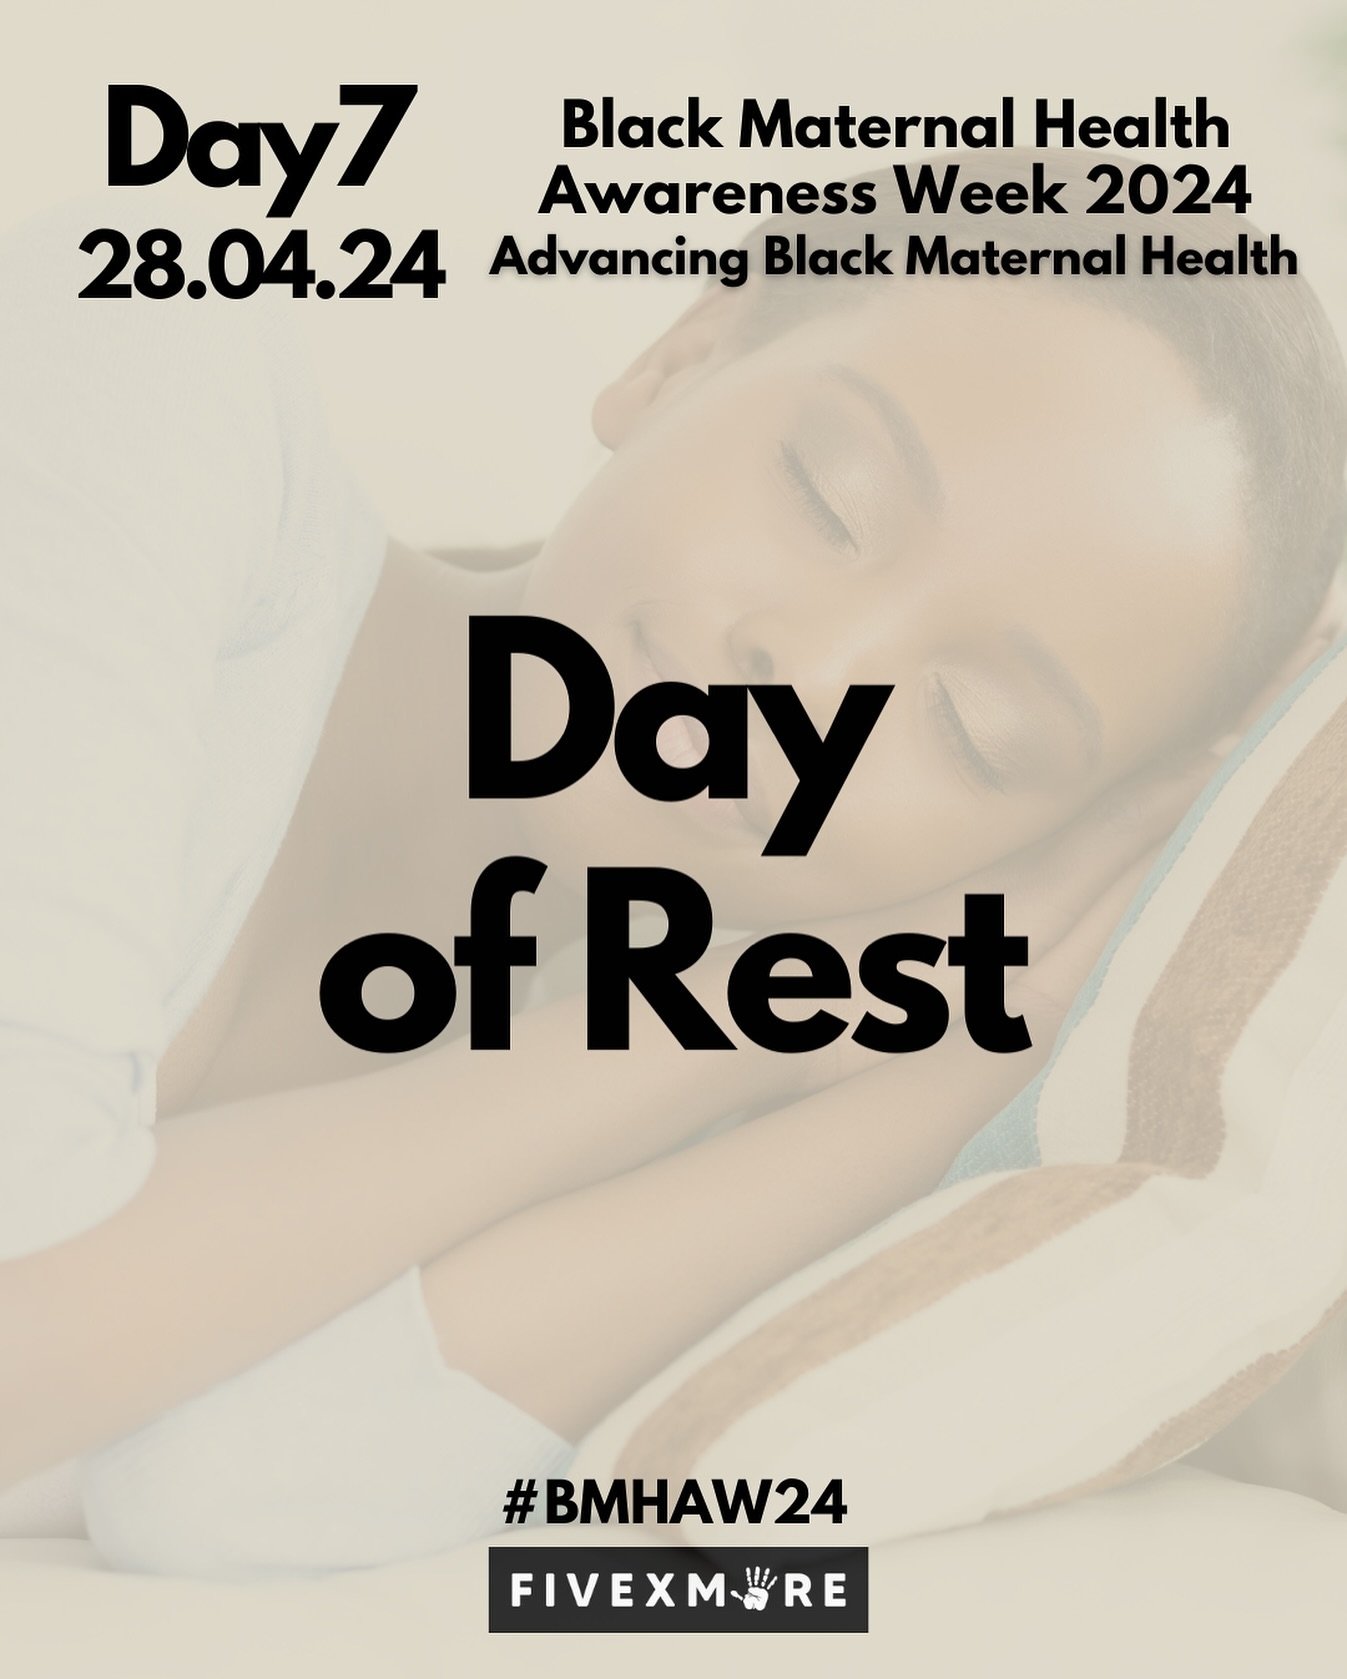 Today, we prioritise rest and express our gratitude to everyone who contributed to this impactful week. It&rsquo;s been a whirlwind of information and experiences.

Let&rsquo;s take a moment to reflect on what we&rsquo;ve learned about Black maternal